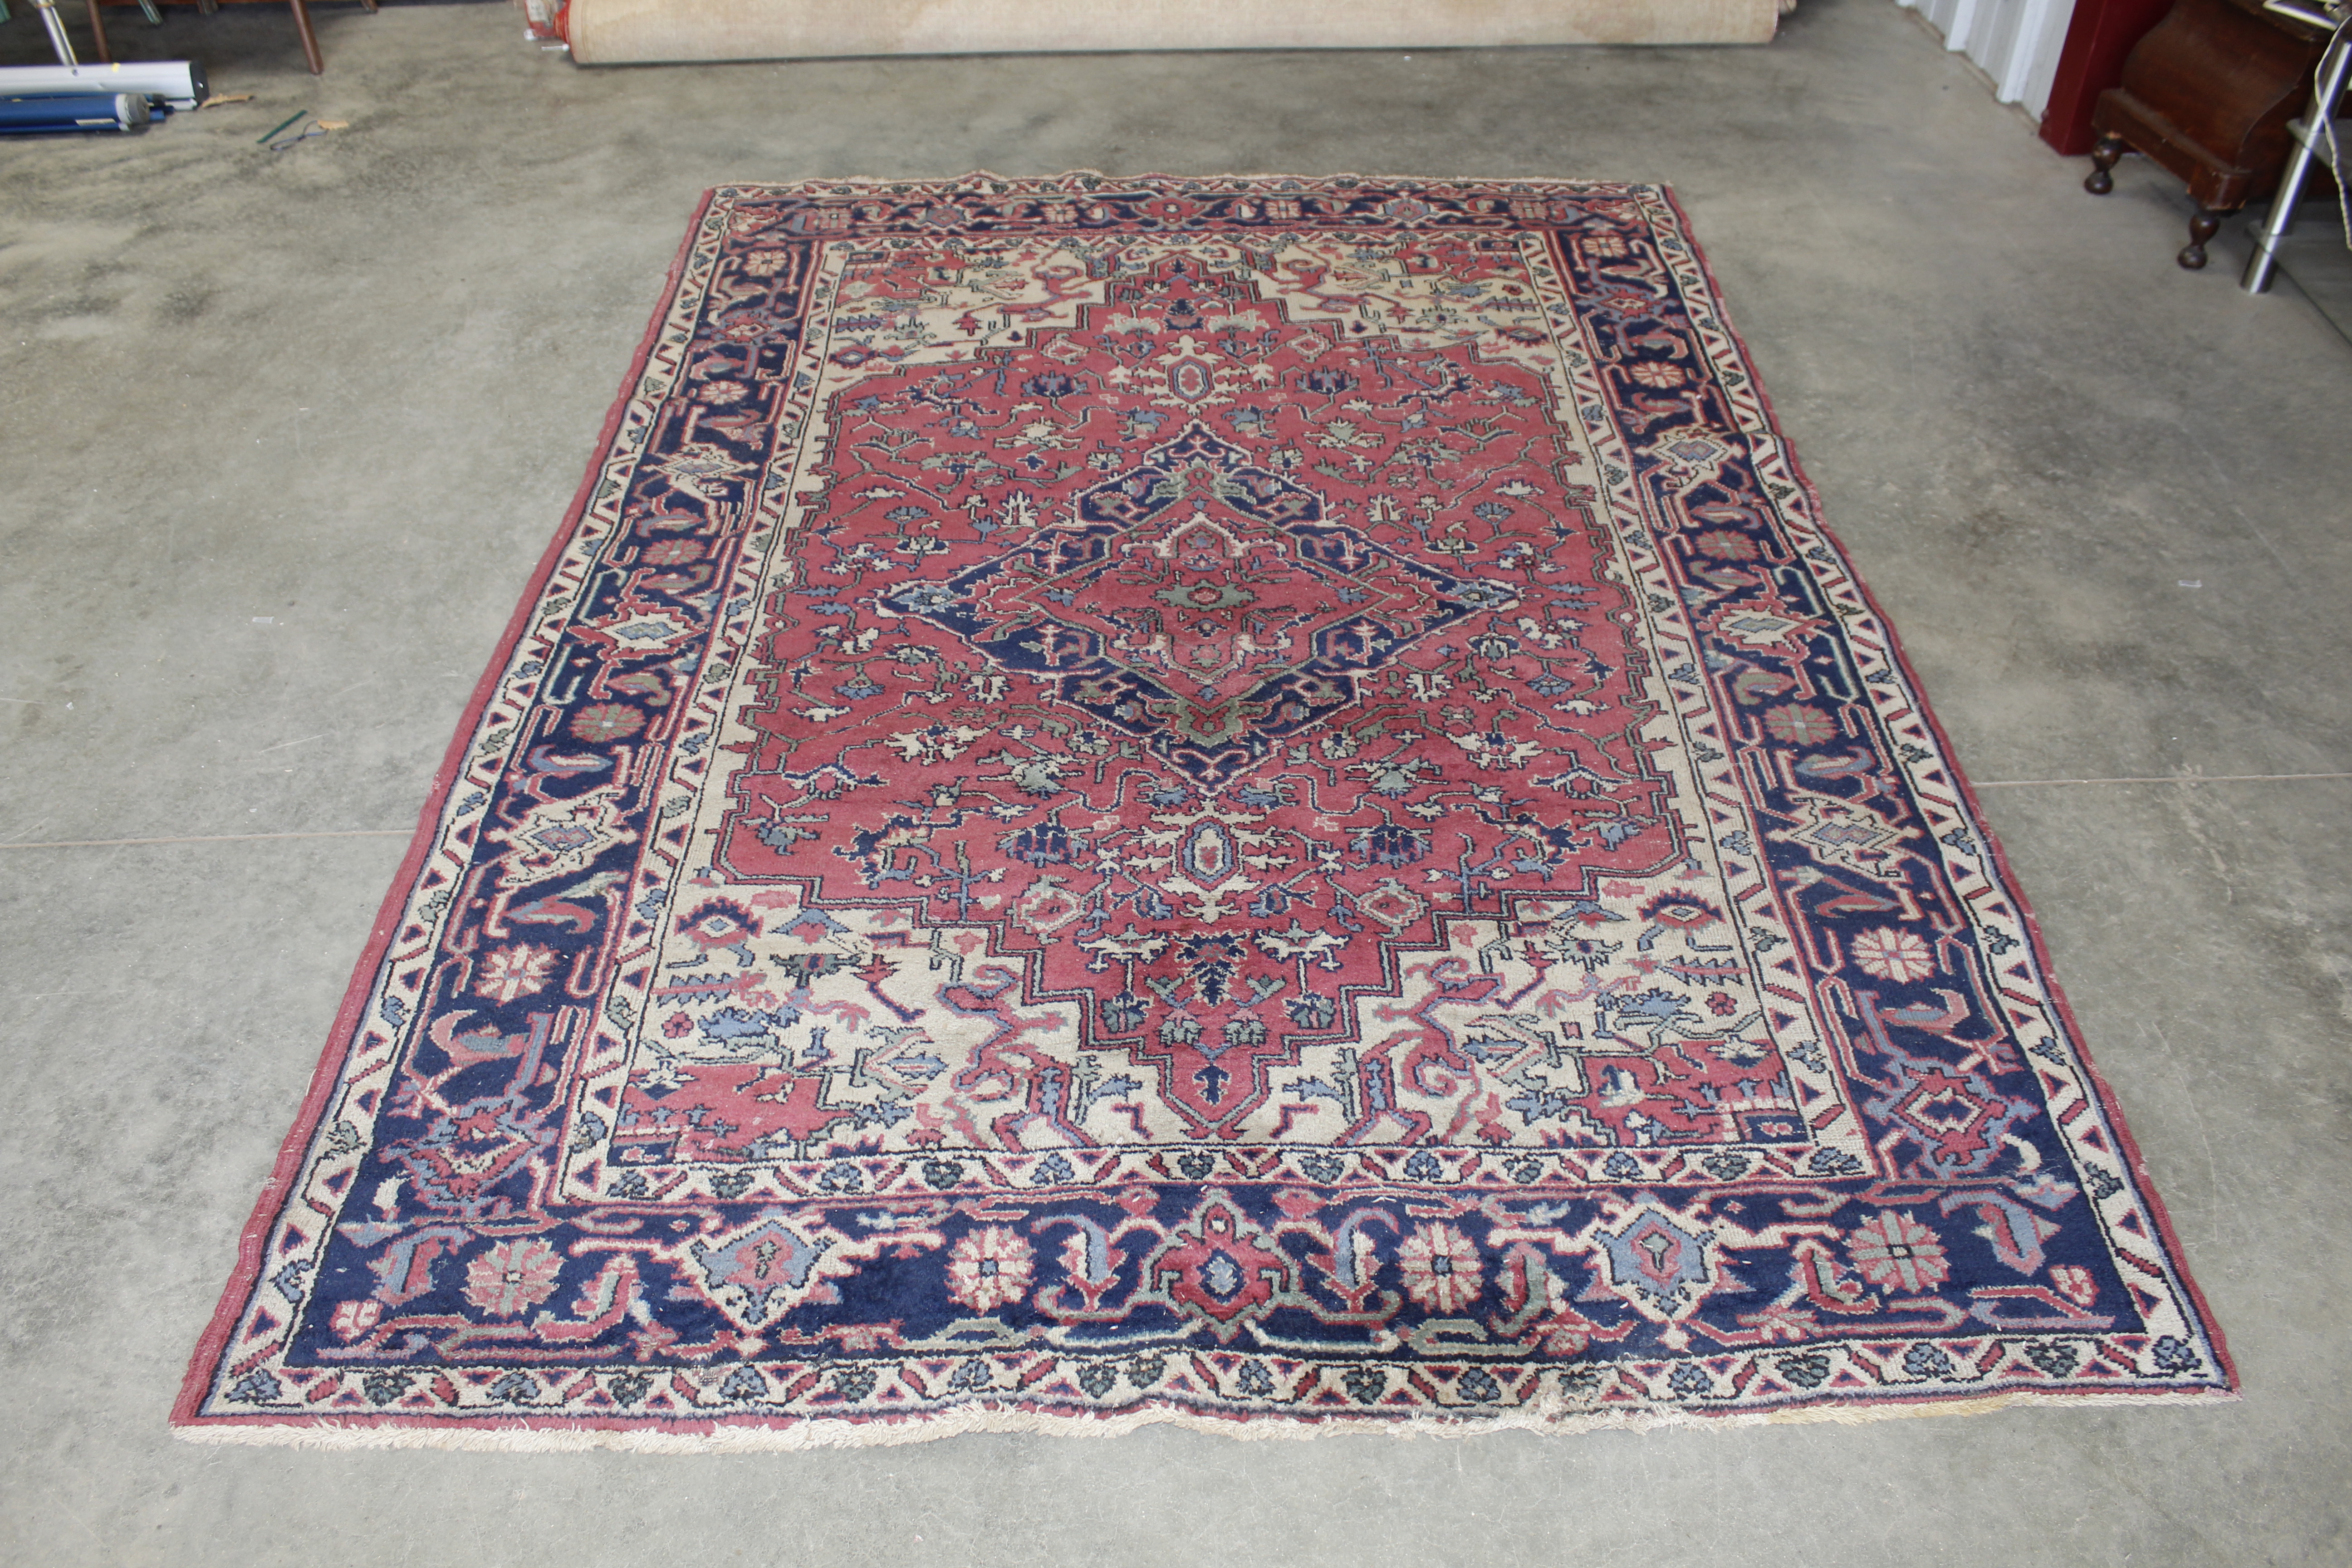 An approx. 9" x 6" blue and red patterned rug